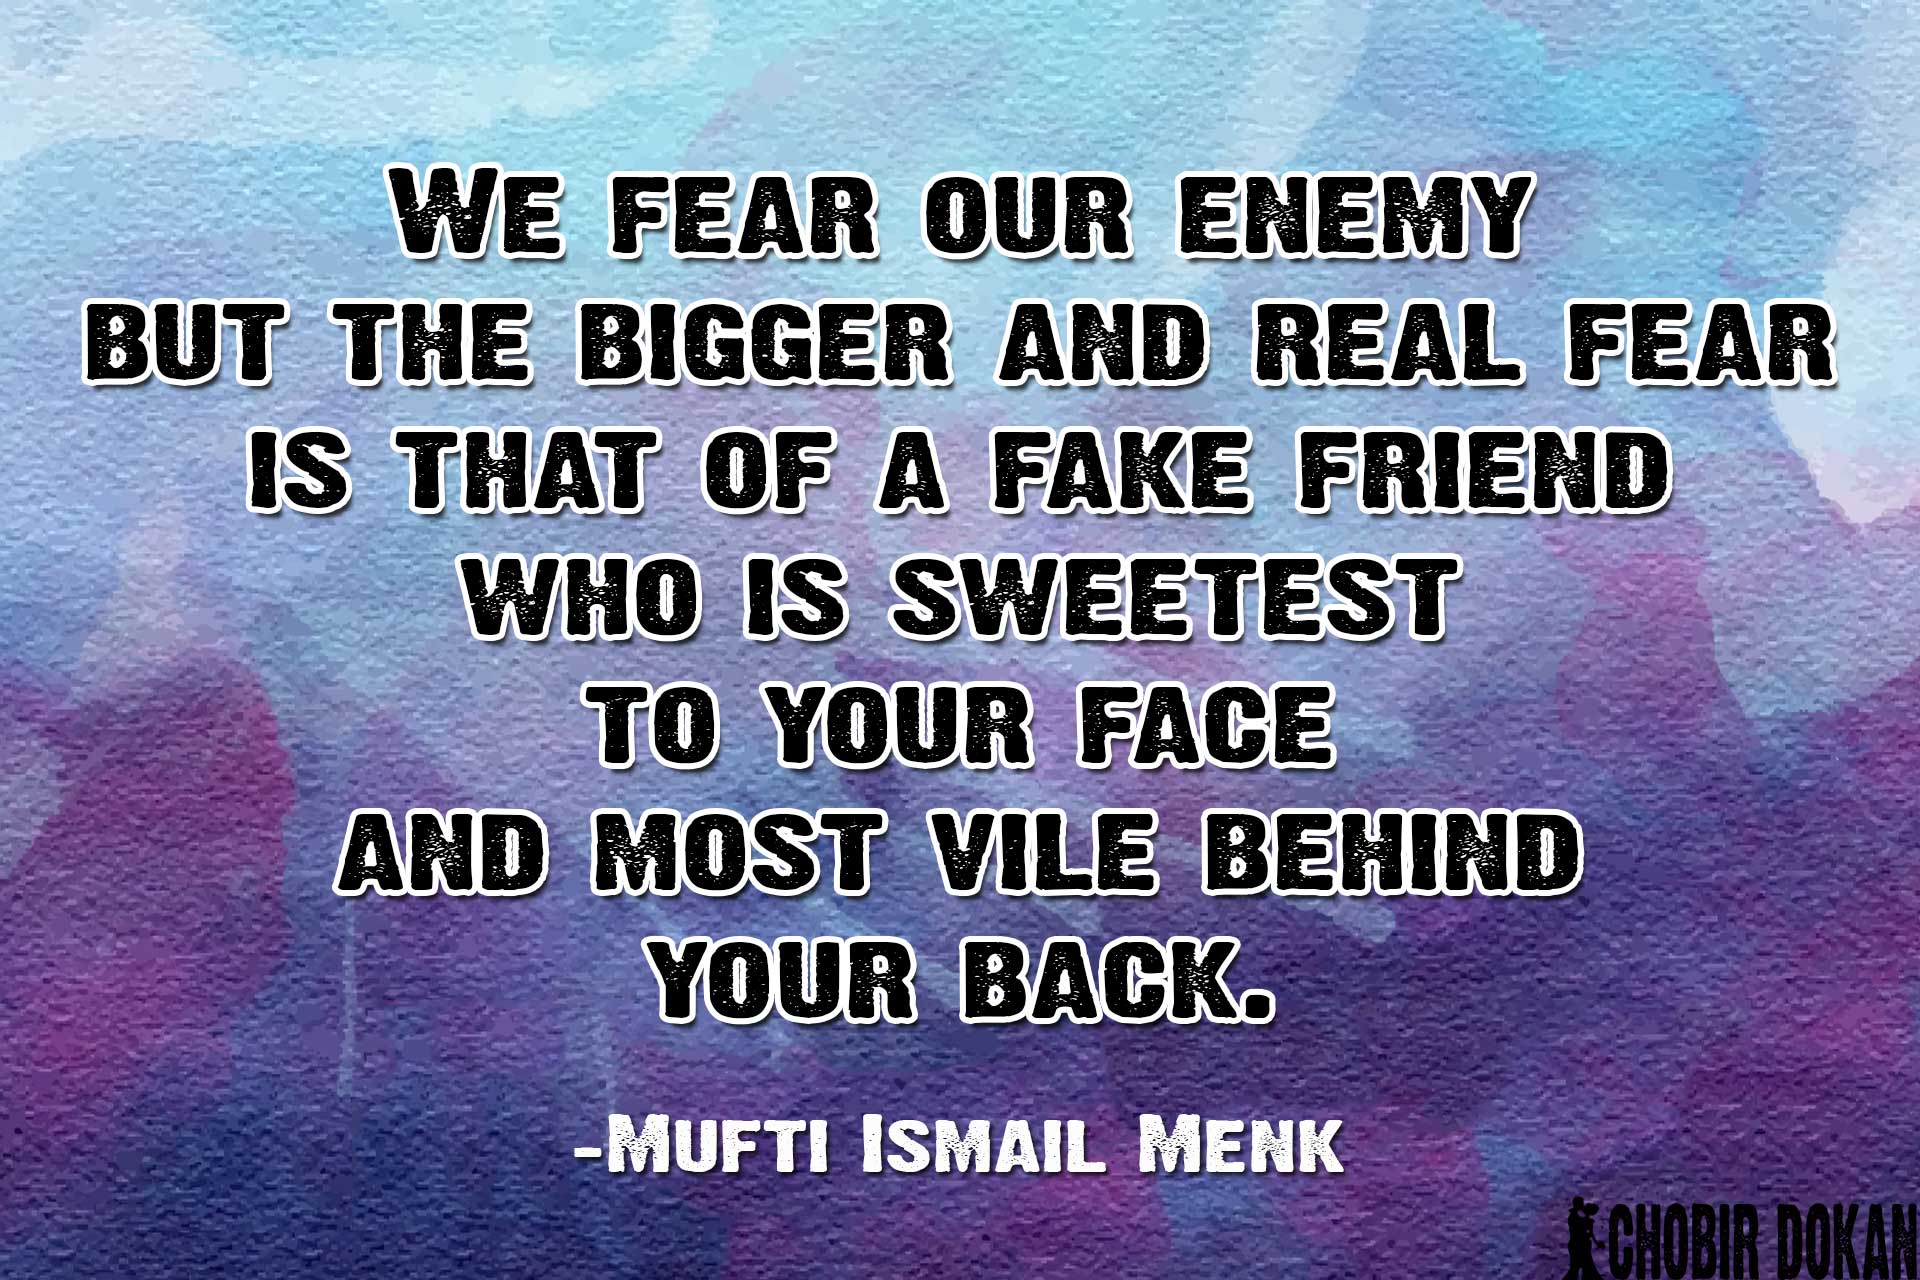 We fear our enemy but the bigger and real fear is that of a fake friend who...